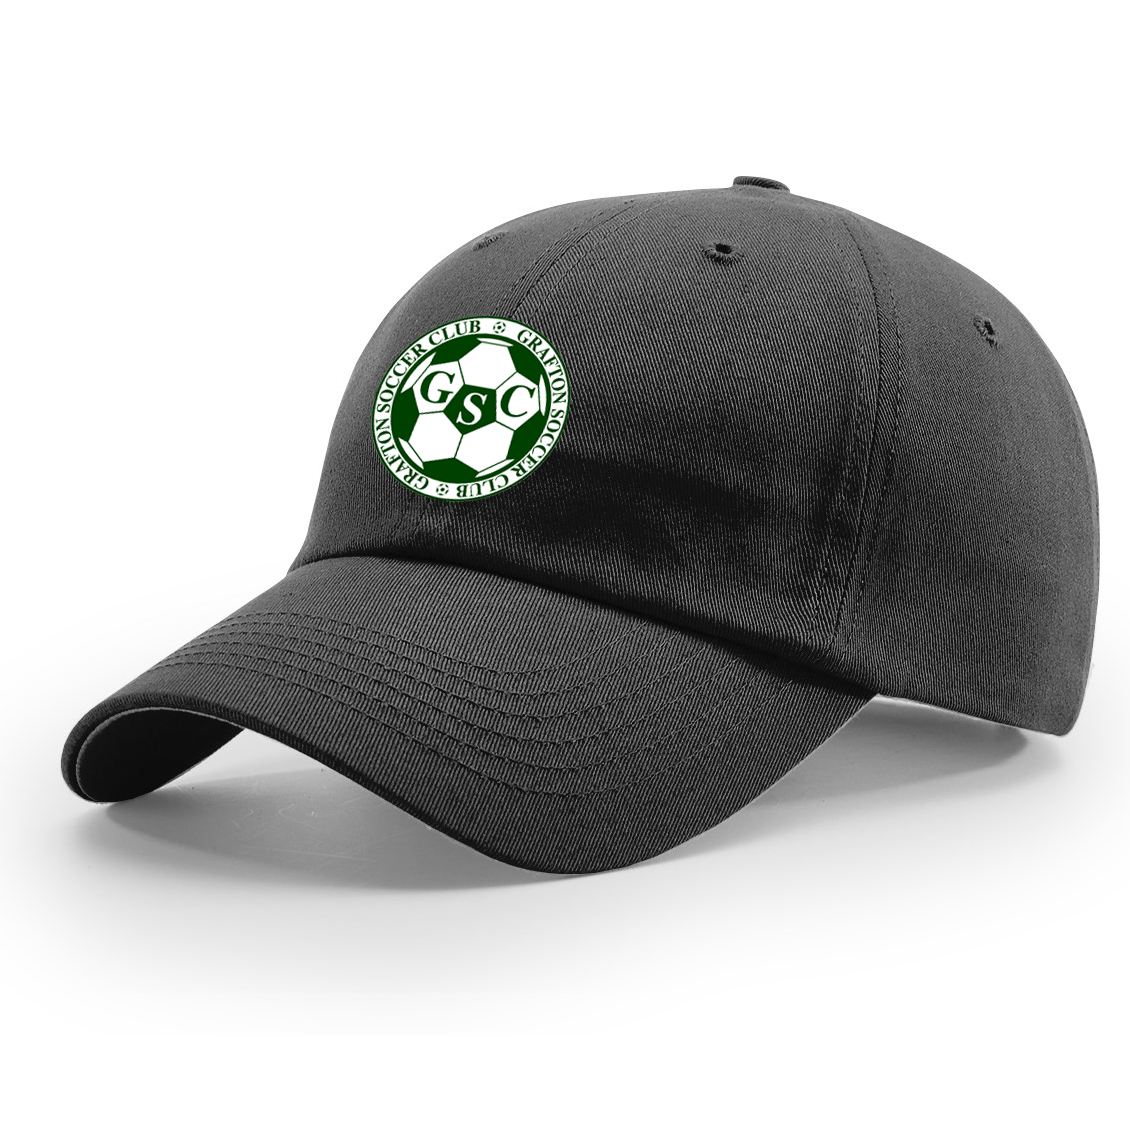 Grafton Youth Soccer Club Richardson Relaxed Cap